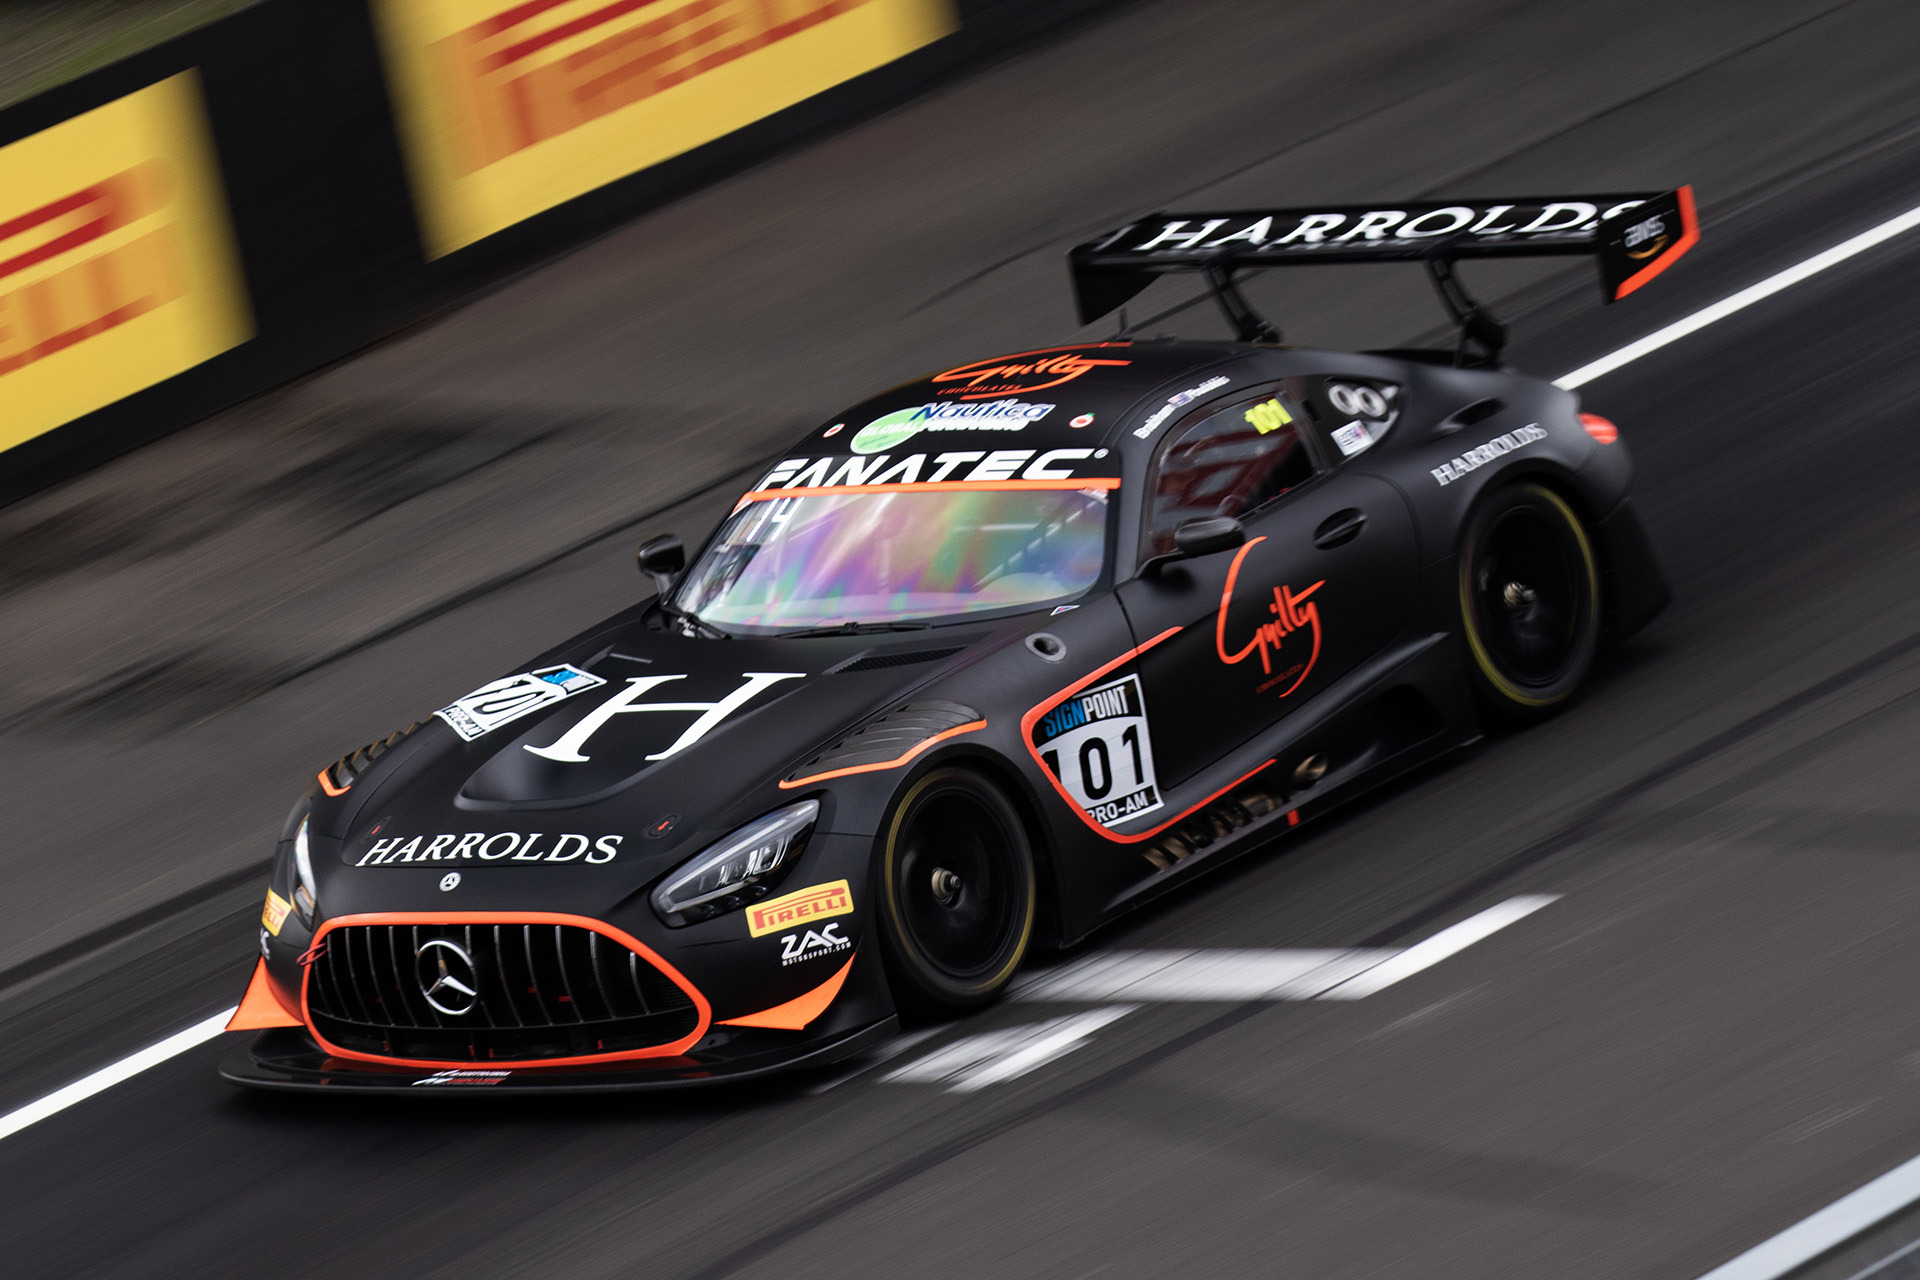 The Harrolds Racing-run Mercedes-AMG GT3 driven by Sam Brabham and Ross Poulakis.